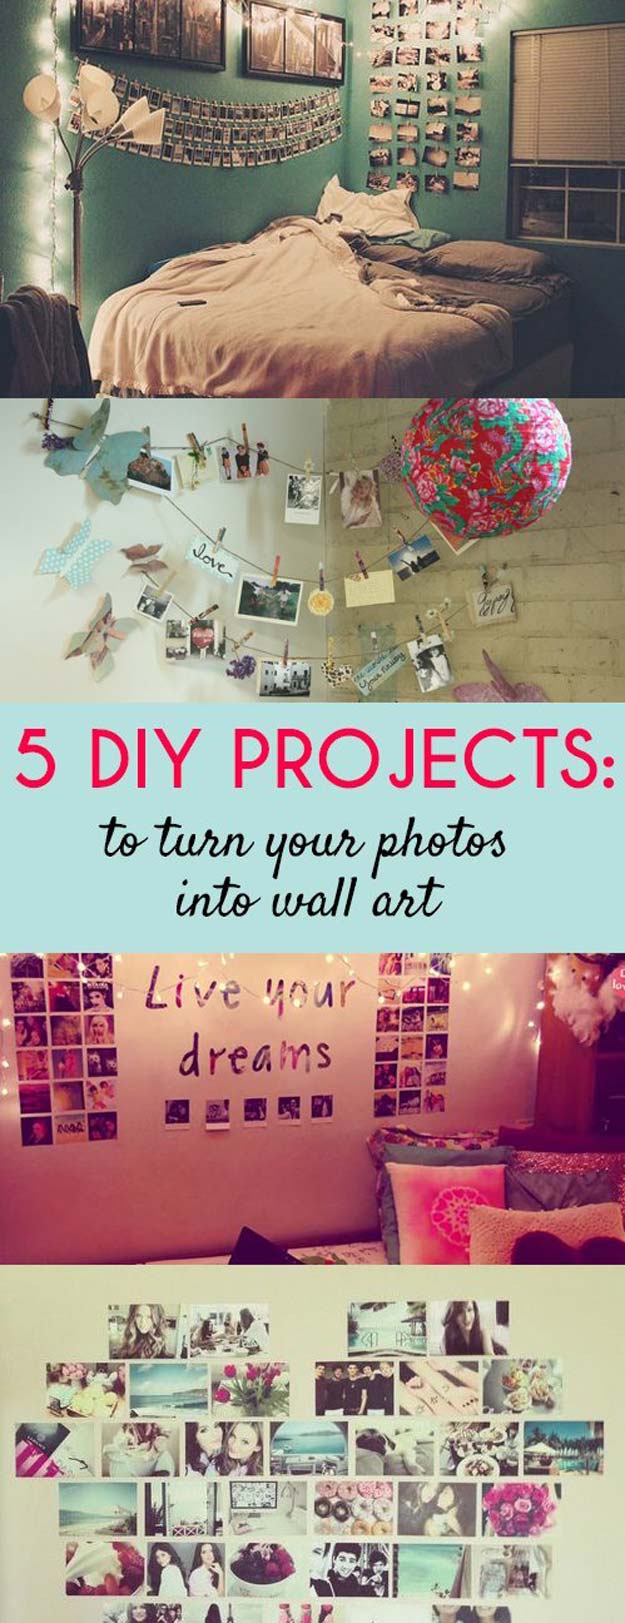 Cool DIY Photo Projects and Craft Ideas for Photos - Wall Art - Easy Ideas for Wall Art, Collage and DIY Gifts for Friends. Wood, Cardboard, Canvas, Instagram Art and Frames. Creative Birthday Ideas and Home Decor for Adults, Teens and Tweens